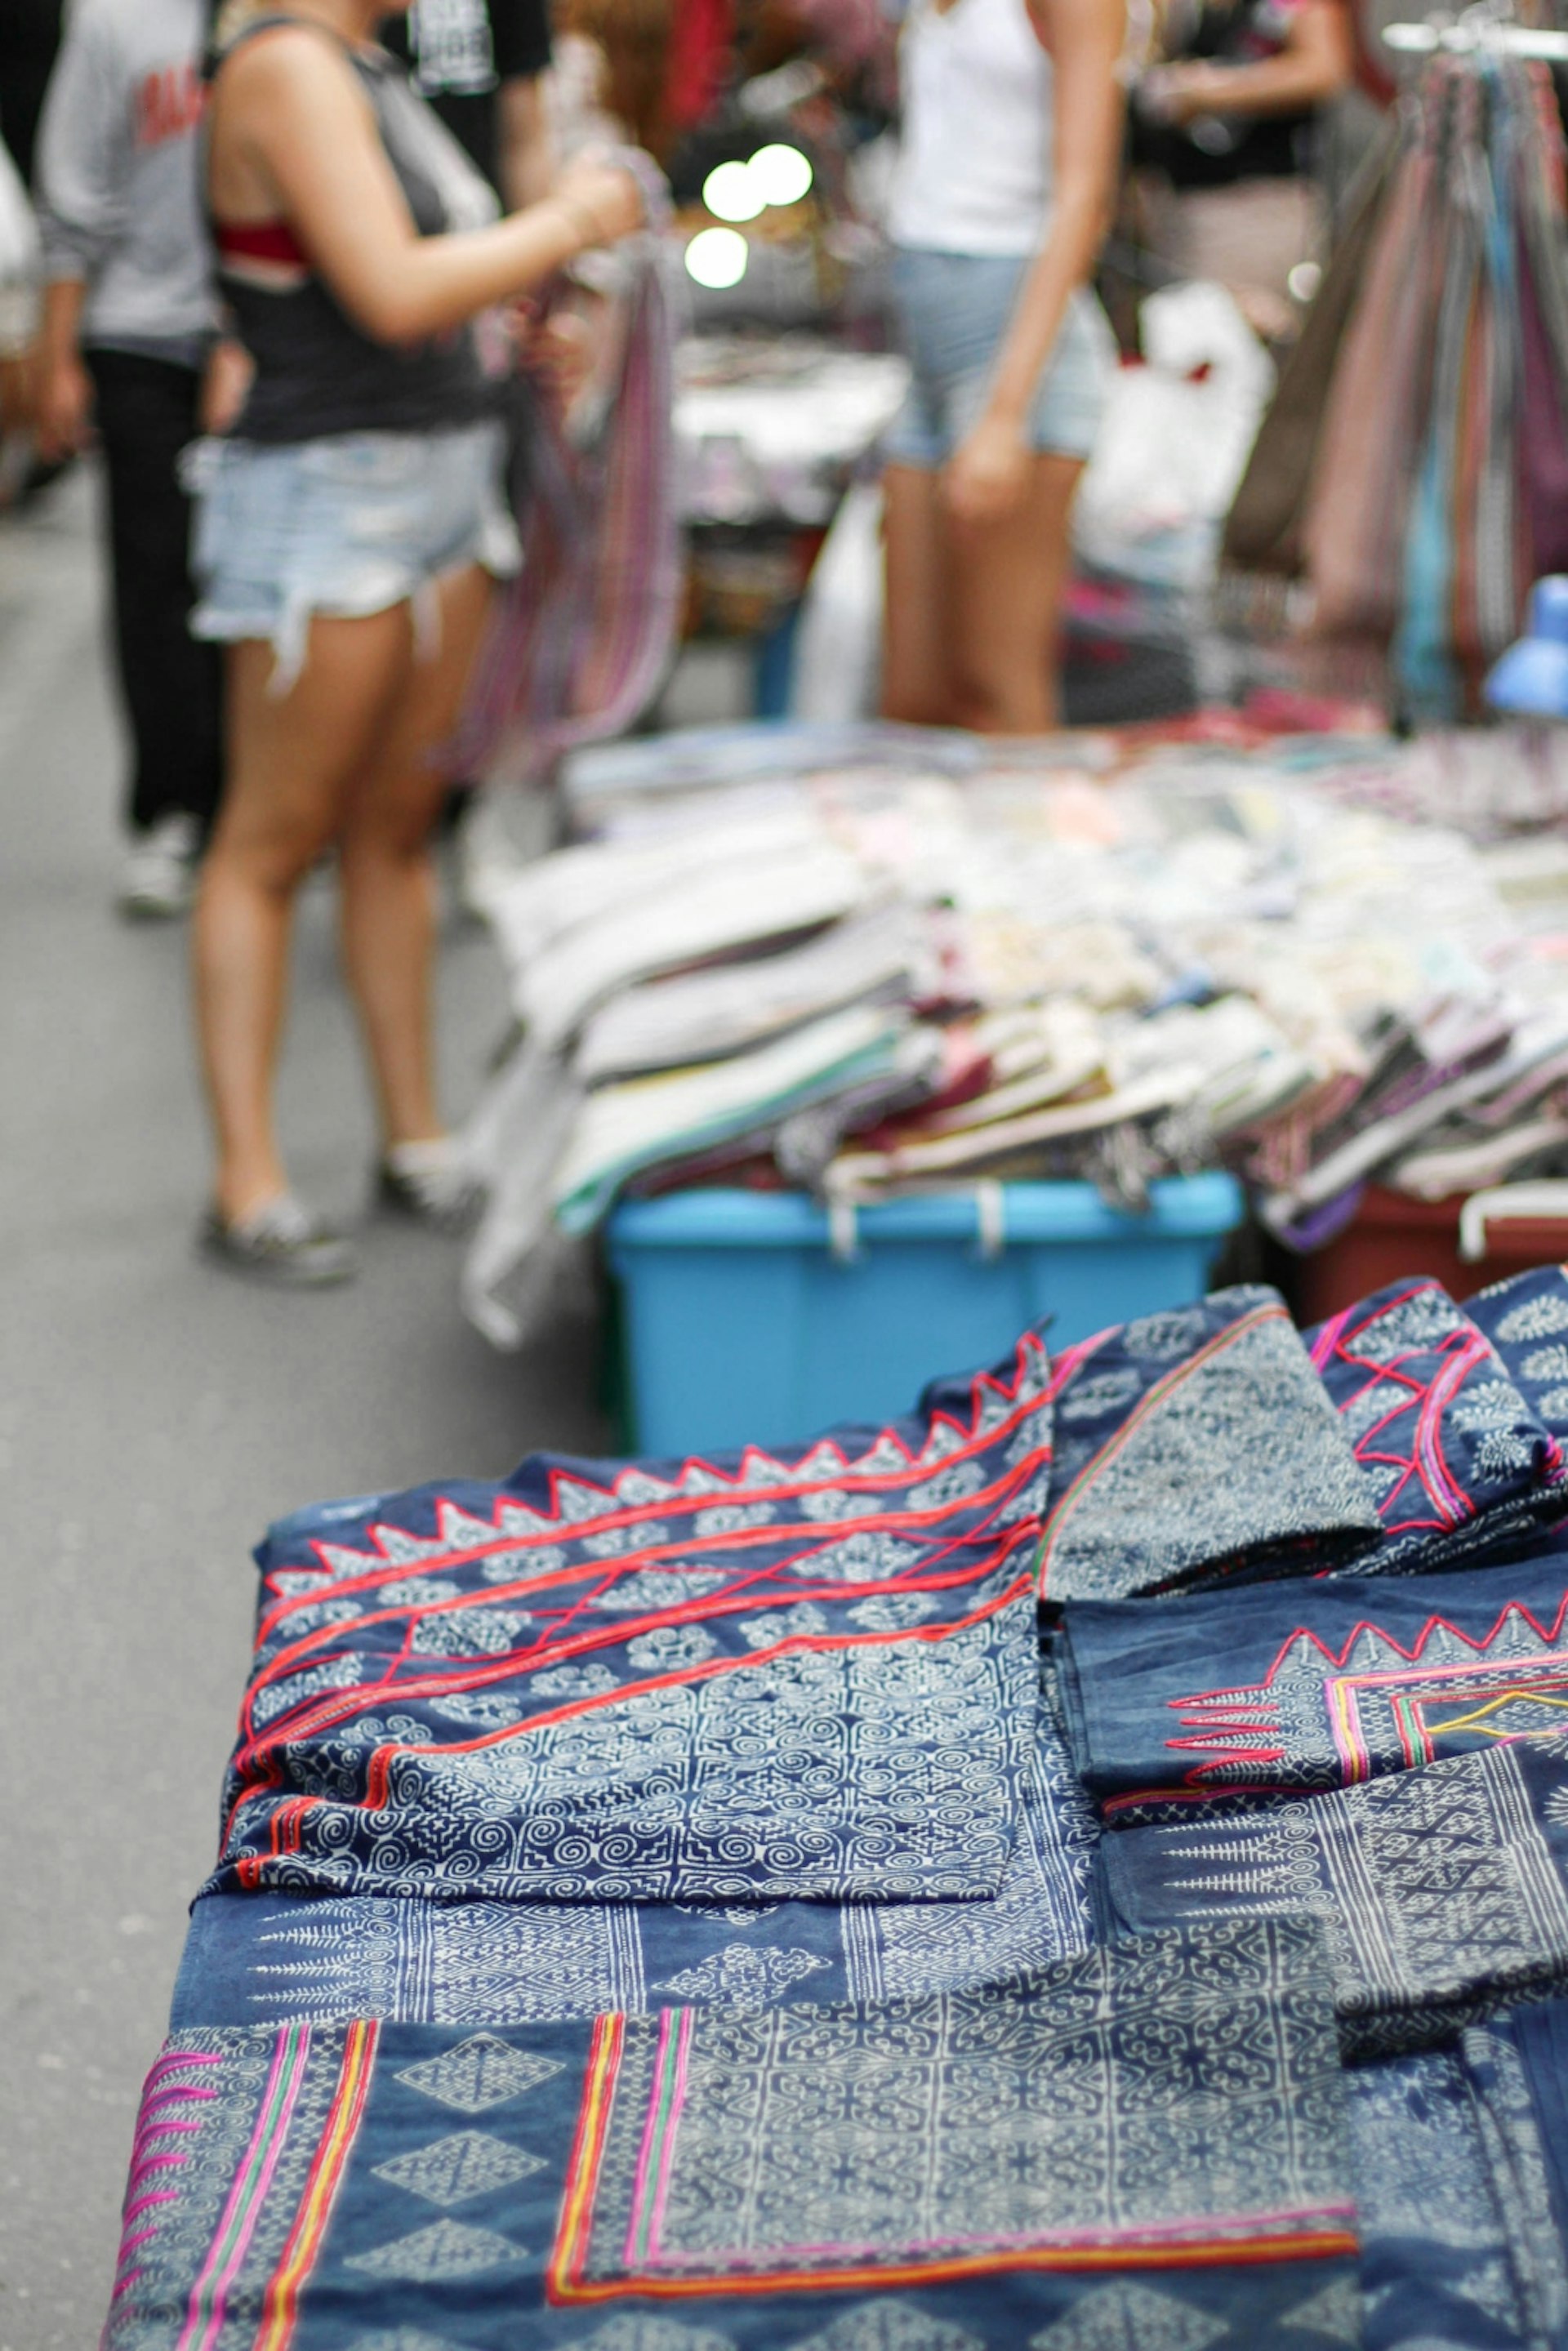 Thai textiles on display at the Sunday Walking Street Market in Chiang Mai, Thailand © Alana Morgan / Lonely Planet